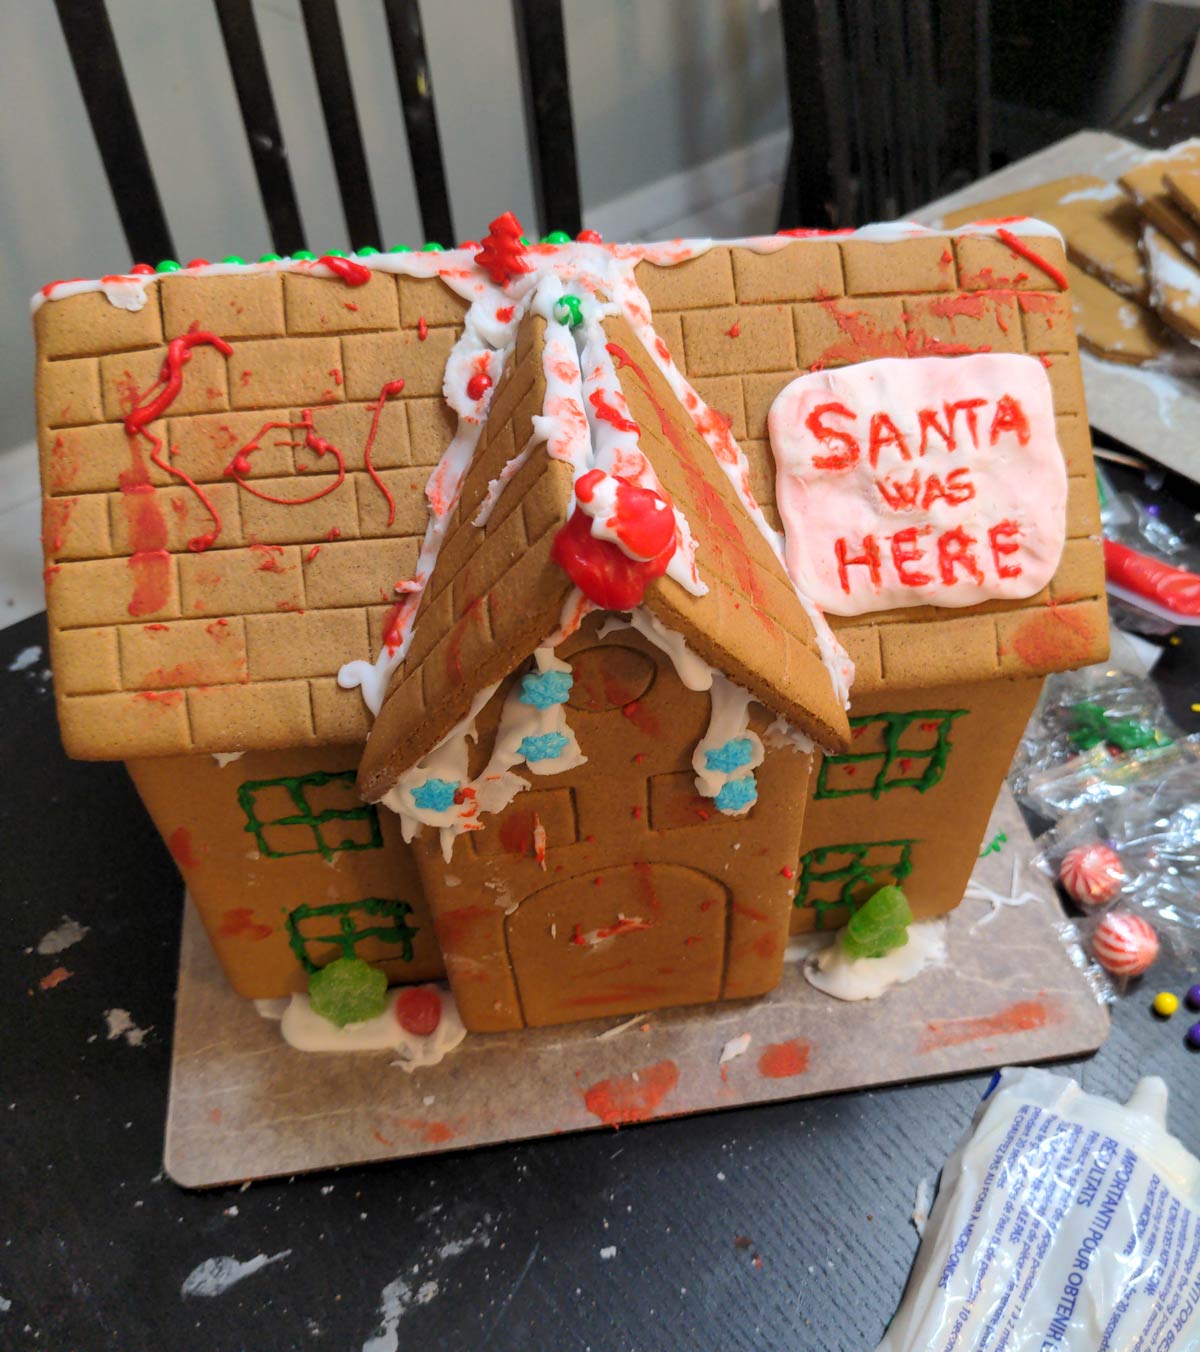 Should I be worried about my son's gingerbread house